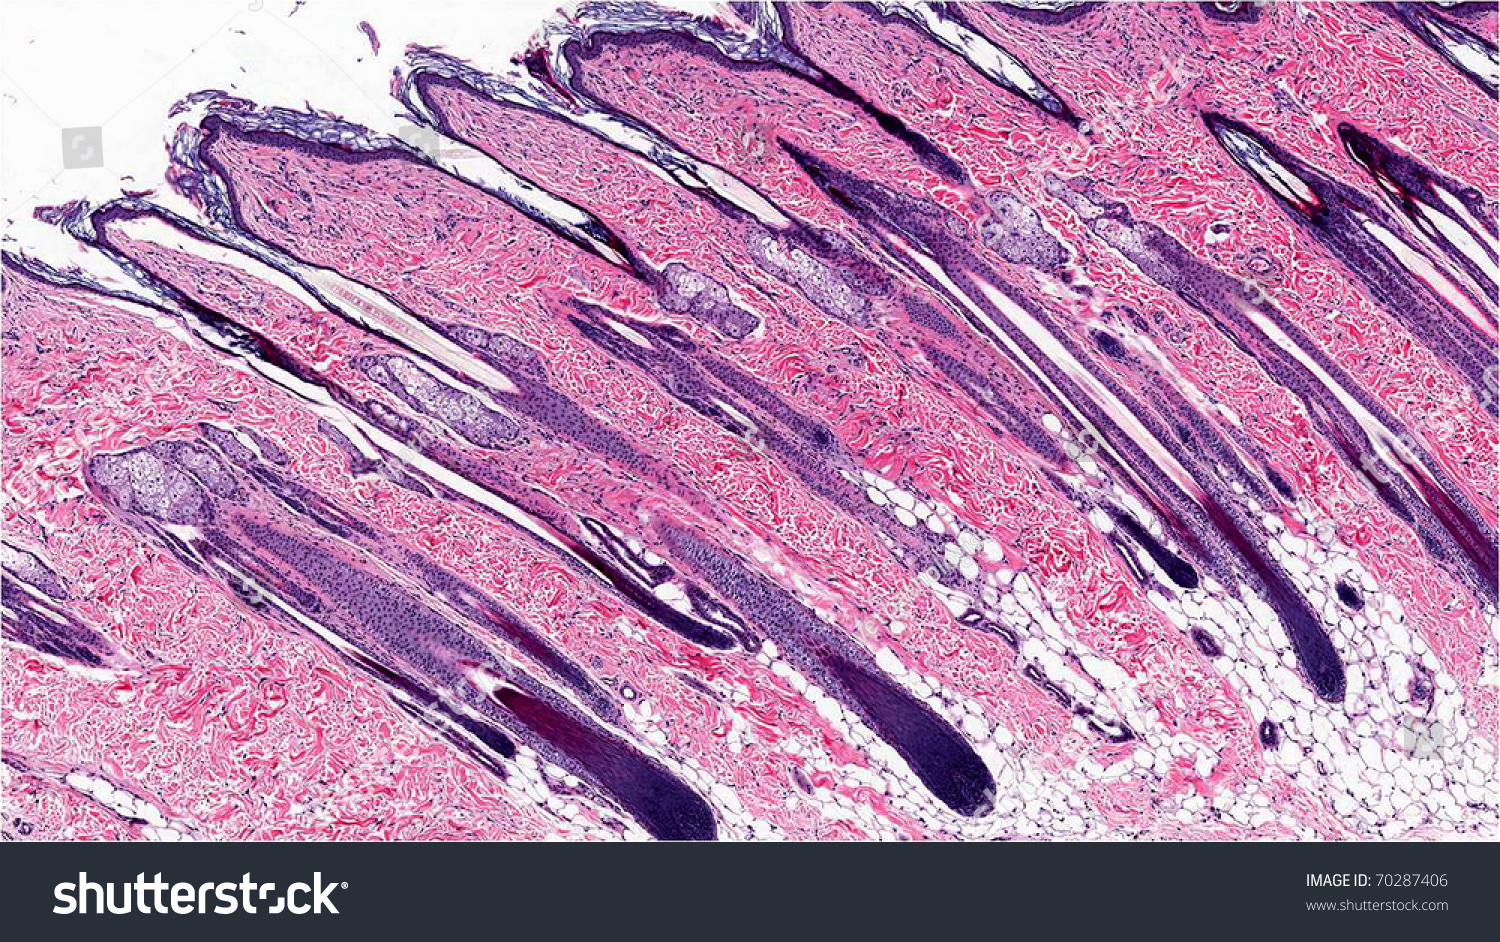 Skin Showing Hair Follicles And Sebaceous Glands - Microscopic Anatomy